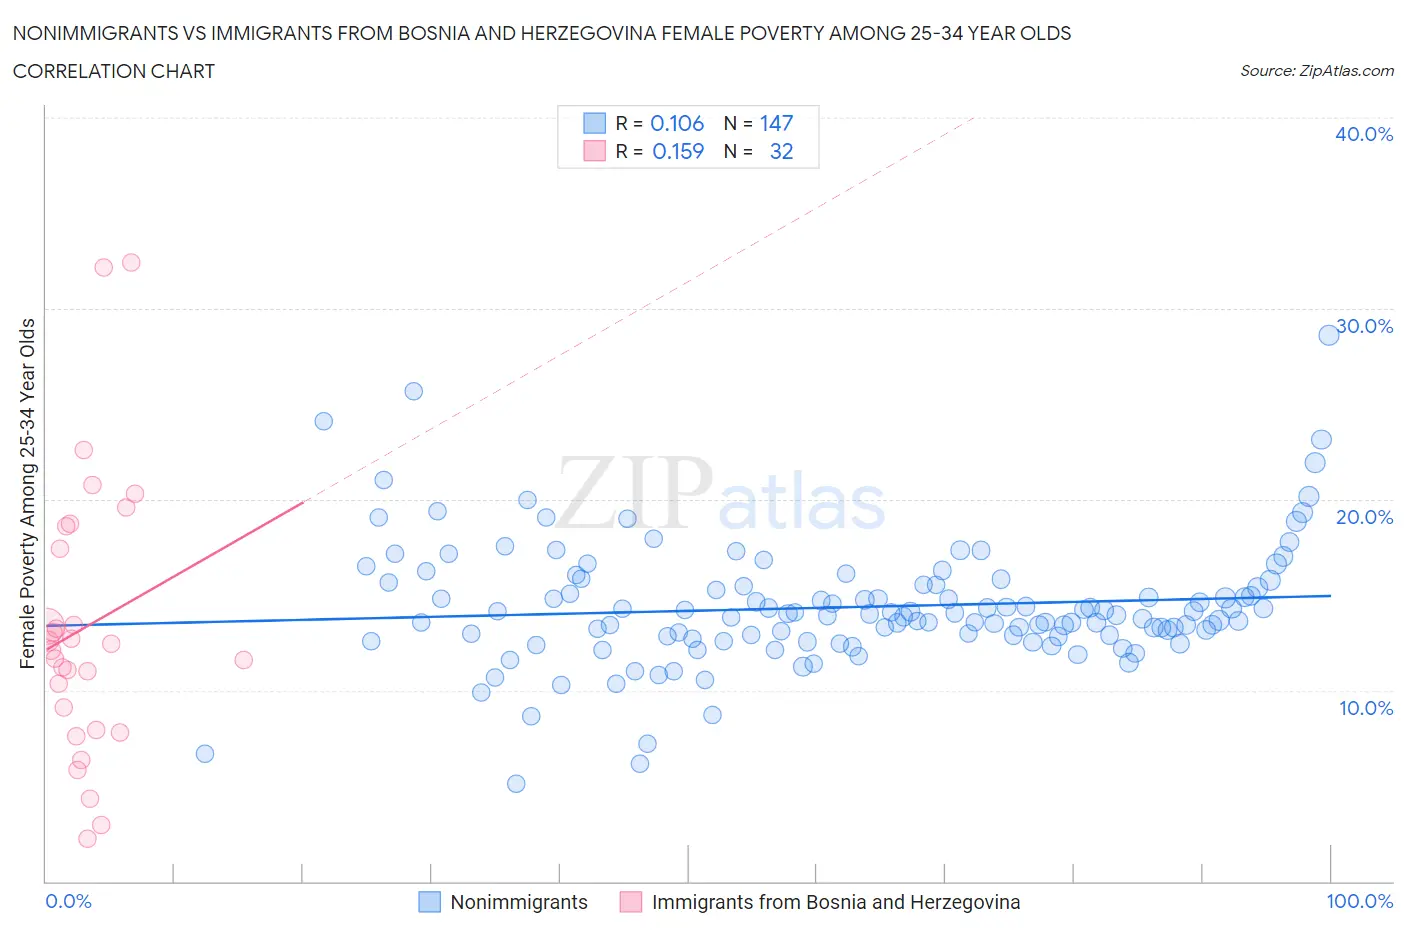 Nonimmigrants vs Immigrants from Bosnia and Herzegovina Female Poverty Among 25-34 Year Olds